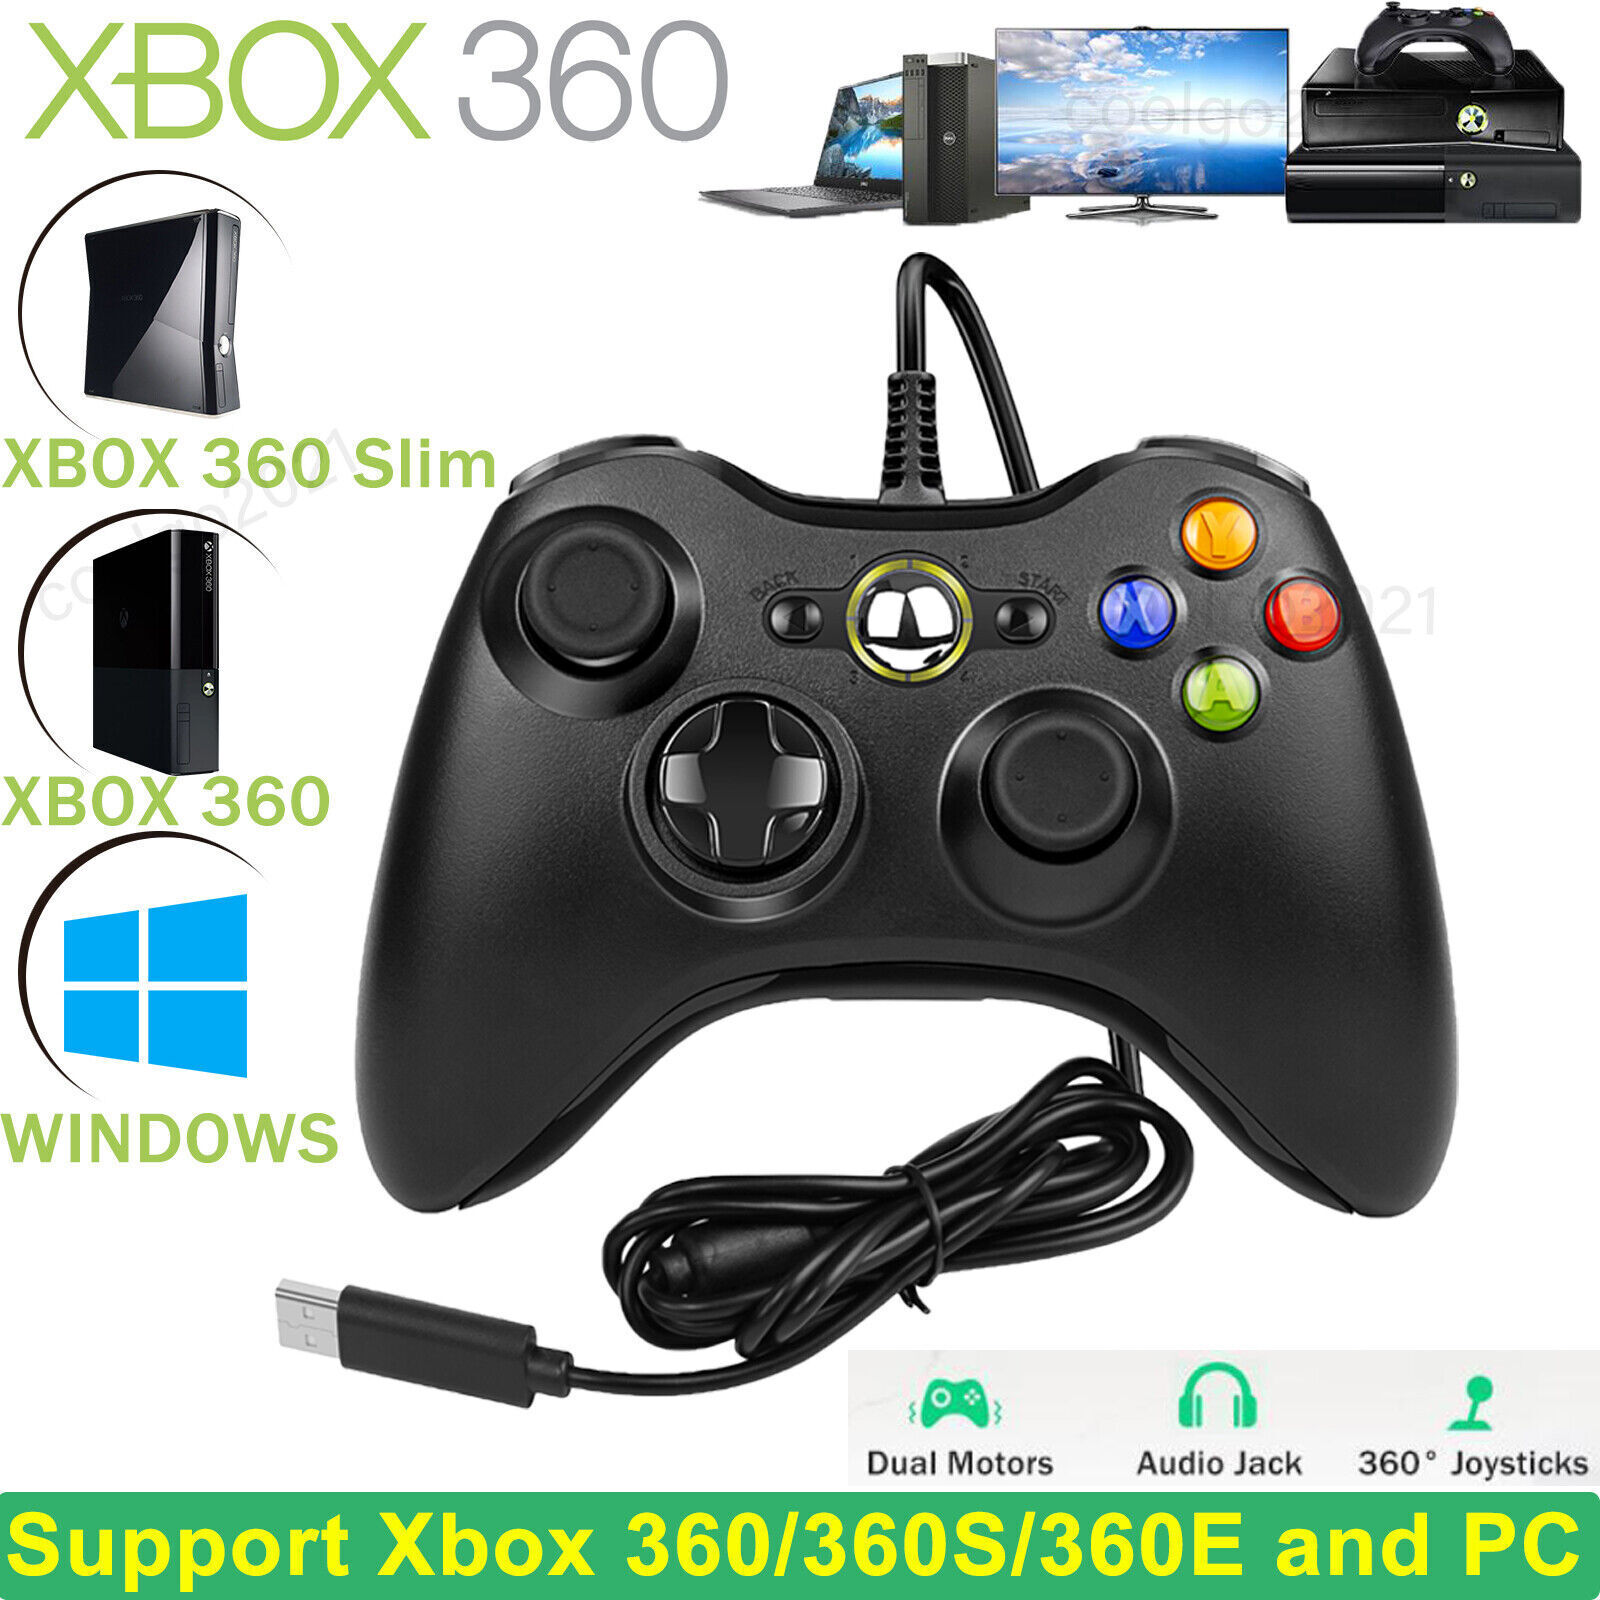 Great Choice Products Wired Controller Usb For Pc Compatible With Xbox 360 / Windows 7 8 10 11 Gamepad